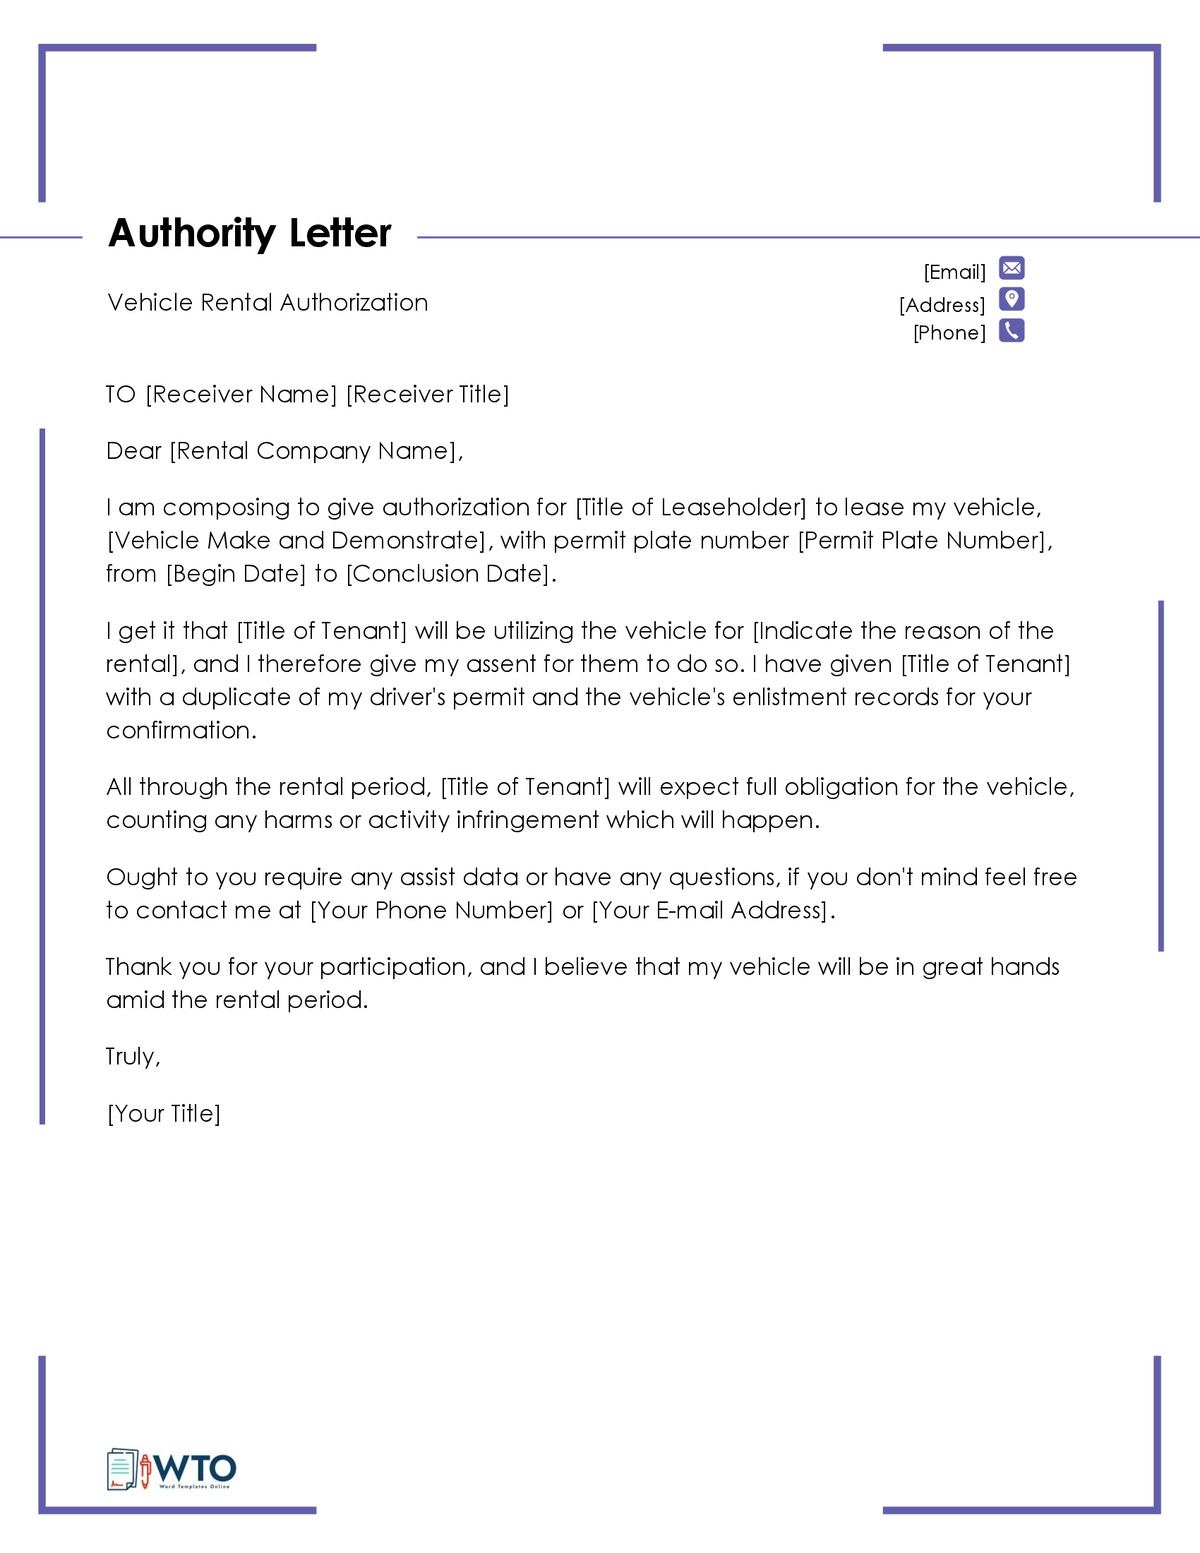 Vehicle Authorization Letter Template-Ms word Format